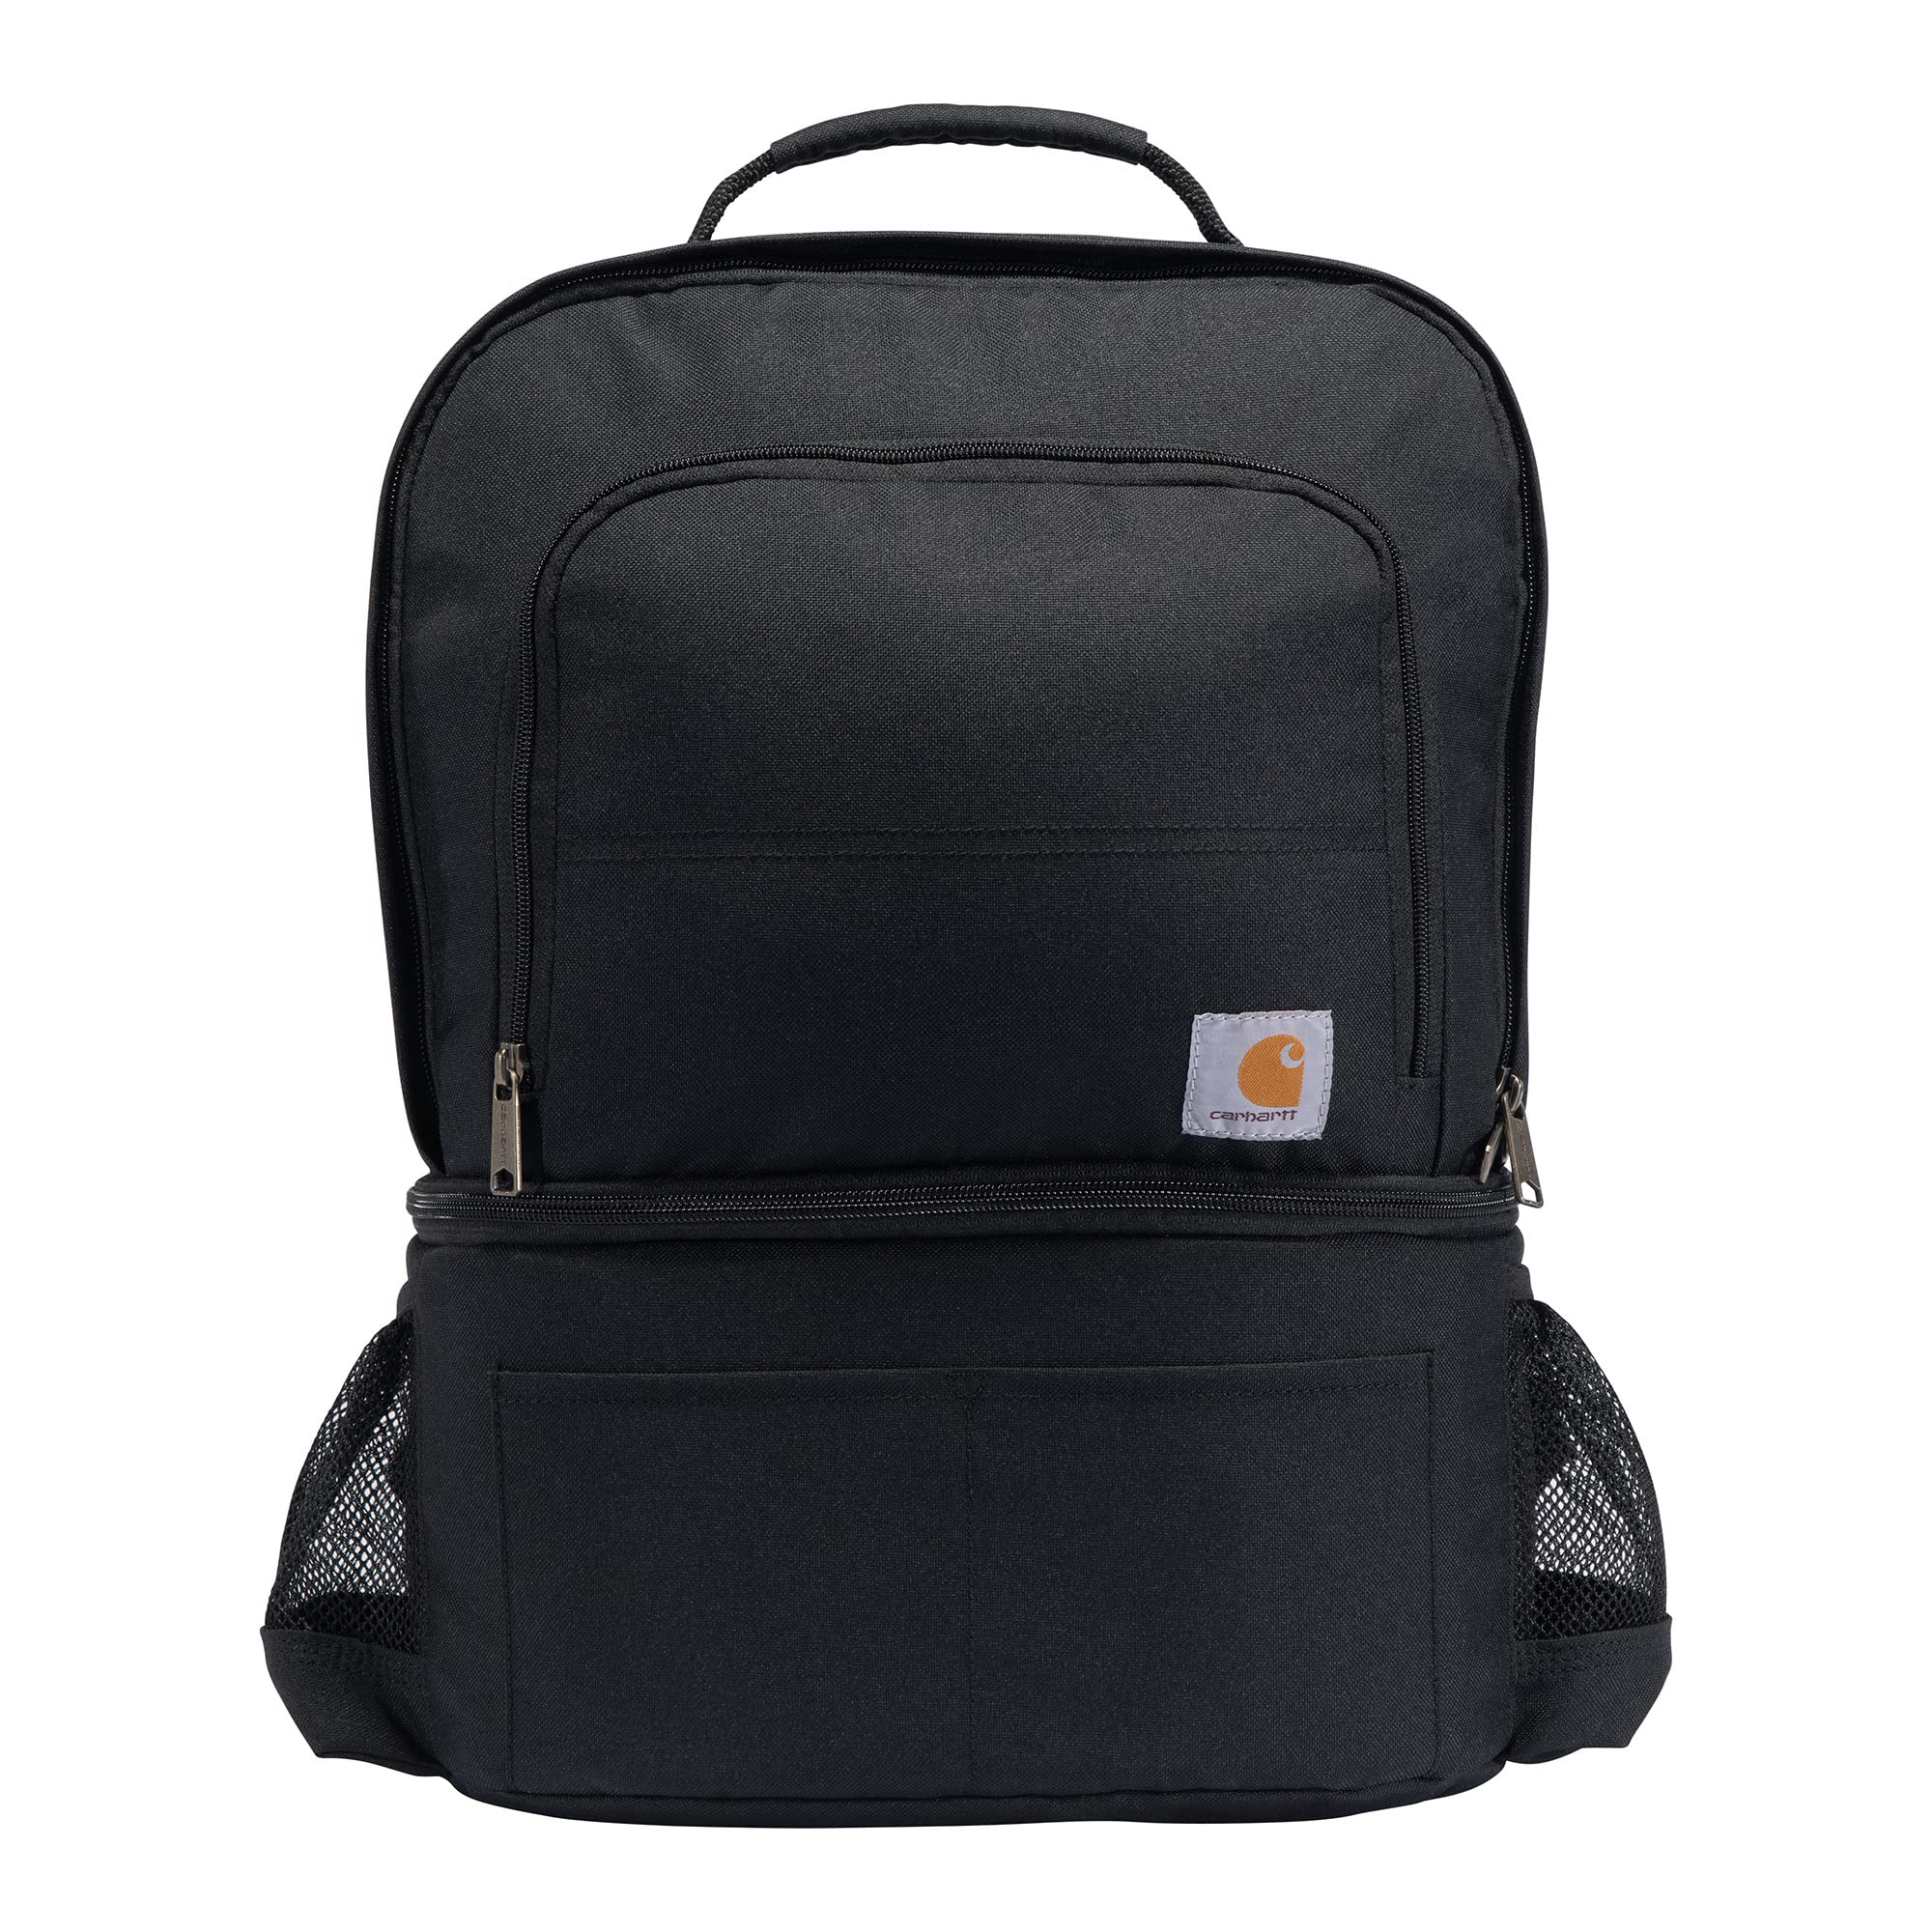 Carhartt 2-in-1 Insulated Cooler Backpack